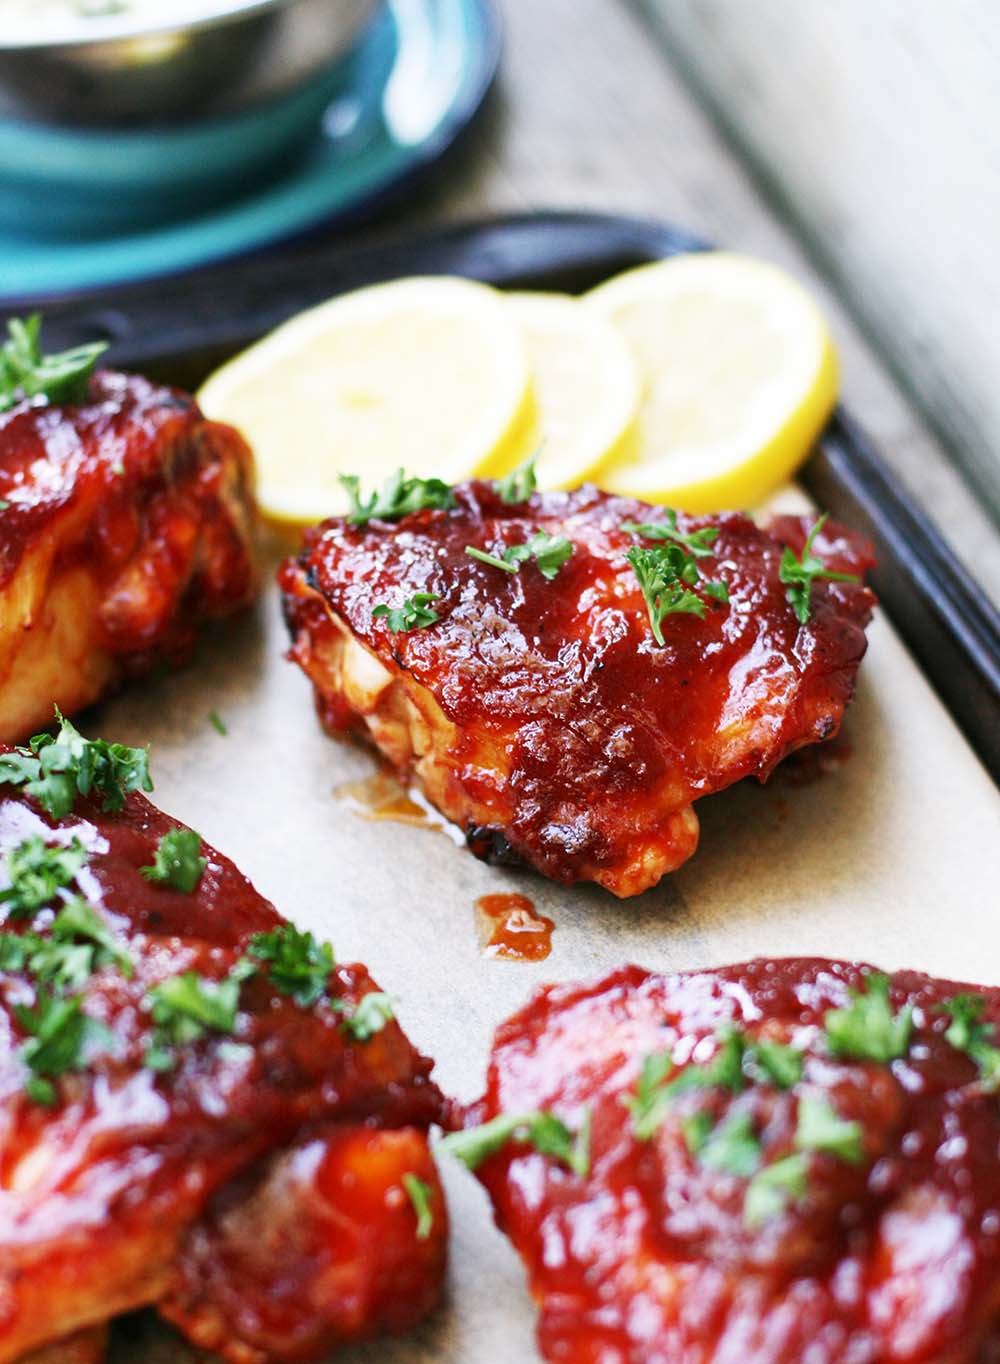 Baked BBQ chicken thighs: This recipe is simple a full of good BBQ flavor!